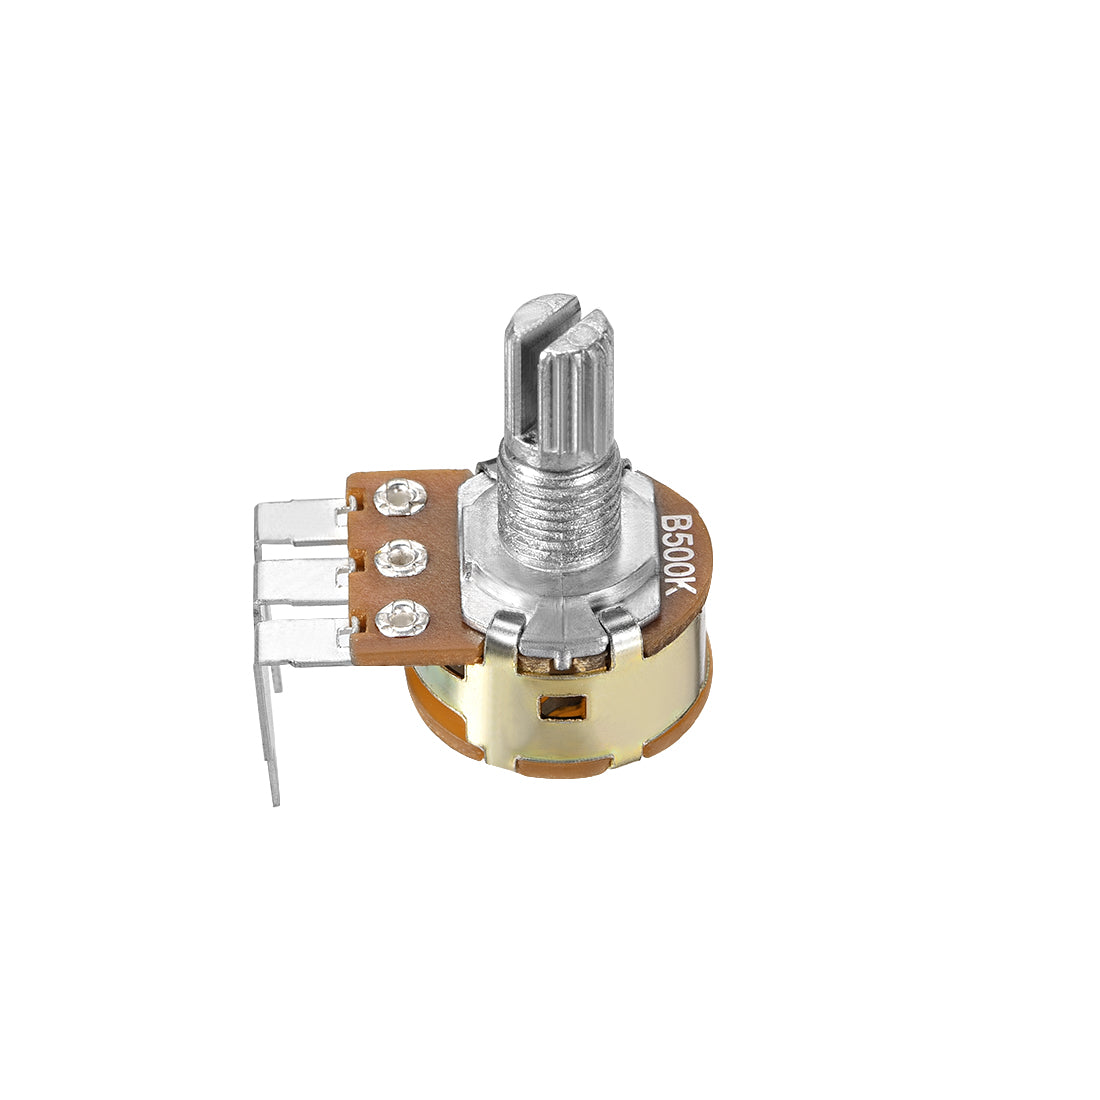 uxcell Uxcell WH148 Potentiometer with Switch 500K Ohm Variable Resistors Single Turn Rotary Carbon Film Taper 5pcs